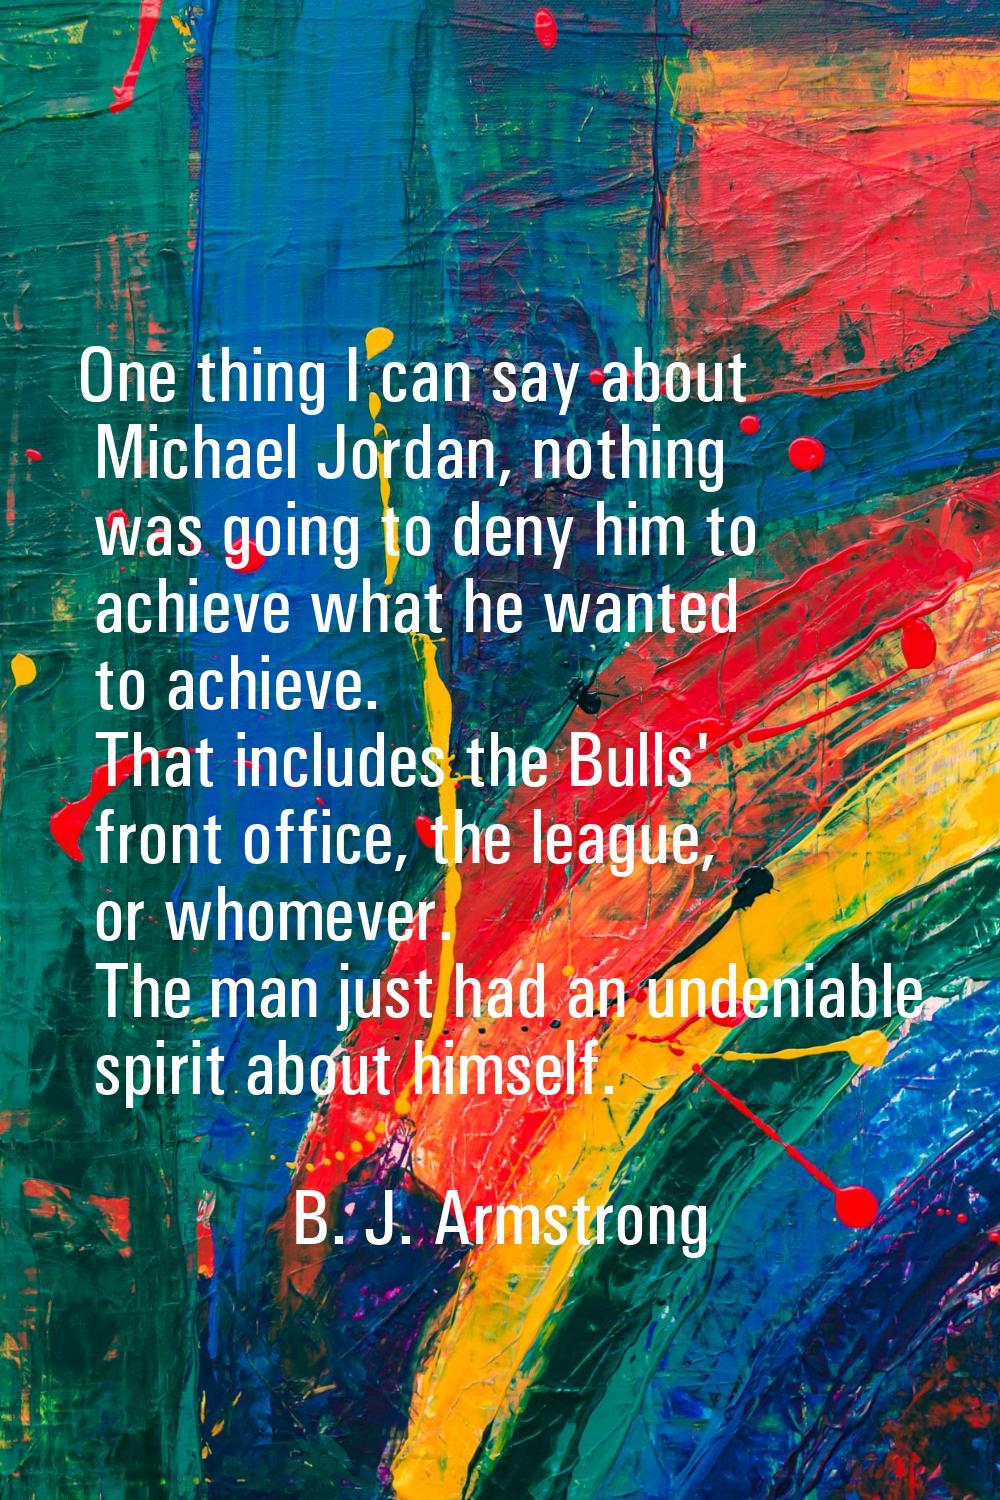 One thing I can say about Michael Jordan, nothing was going to deny him to achieve what he wanted t